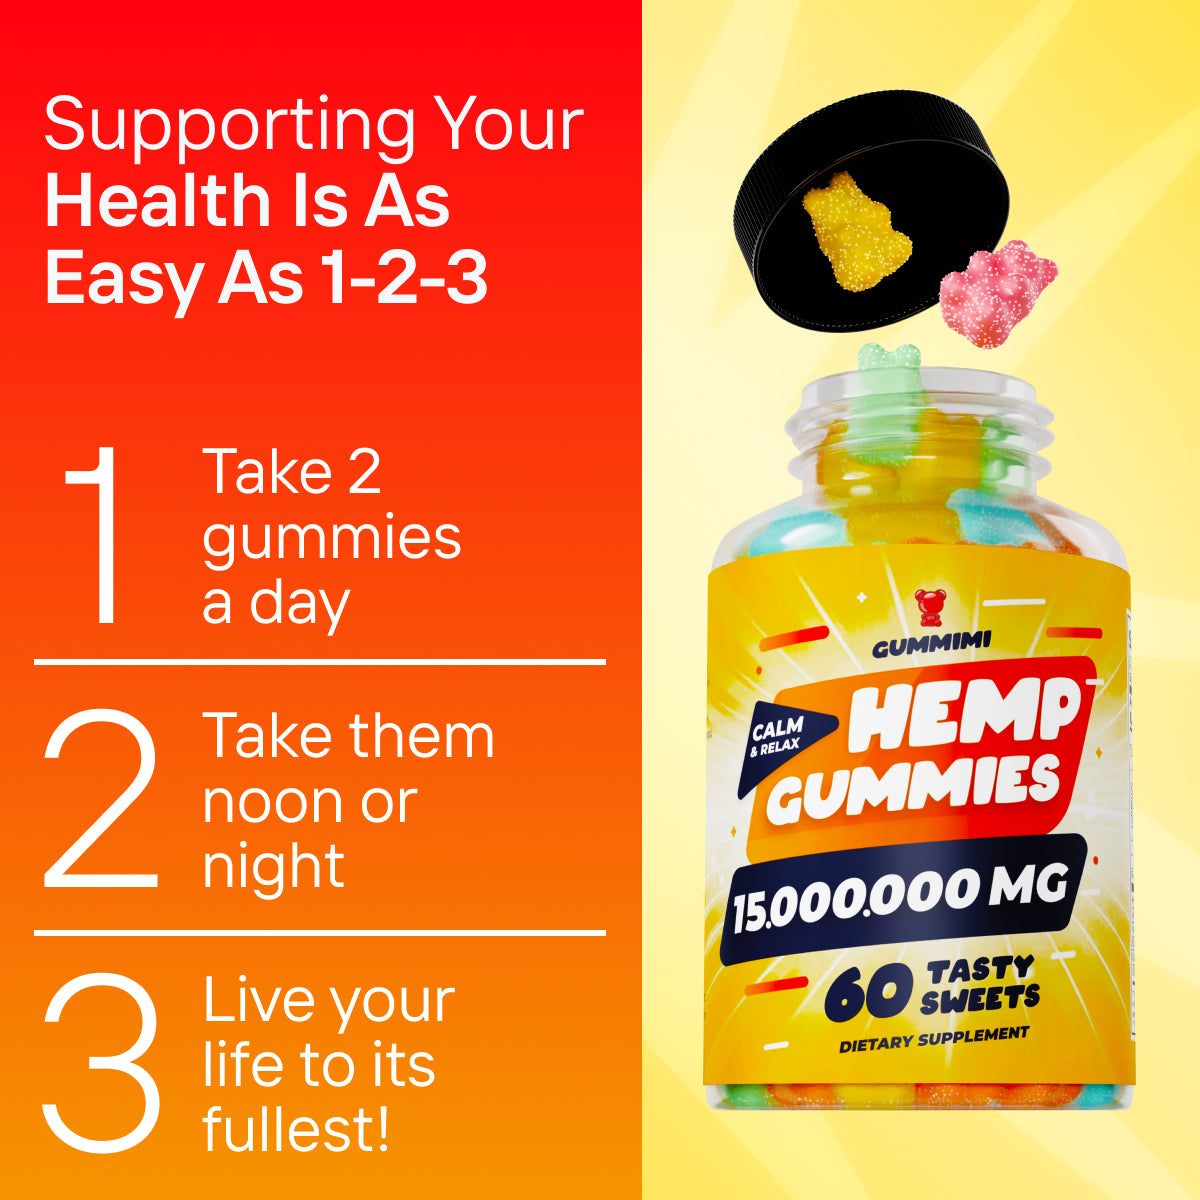 Hеmp Gummies – 15,000,000 – High Potency Comforting Hеmp Oil – Ease Worries, Hurting and Discomfort in Body – Fruity Flavored Gummy Bear